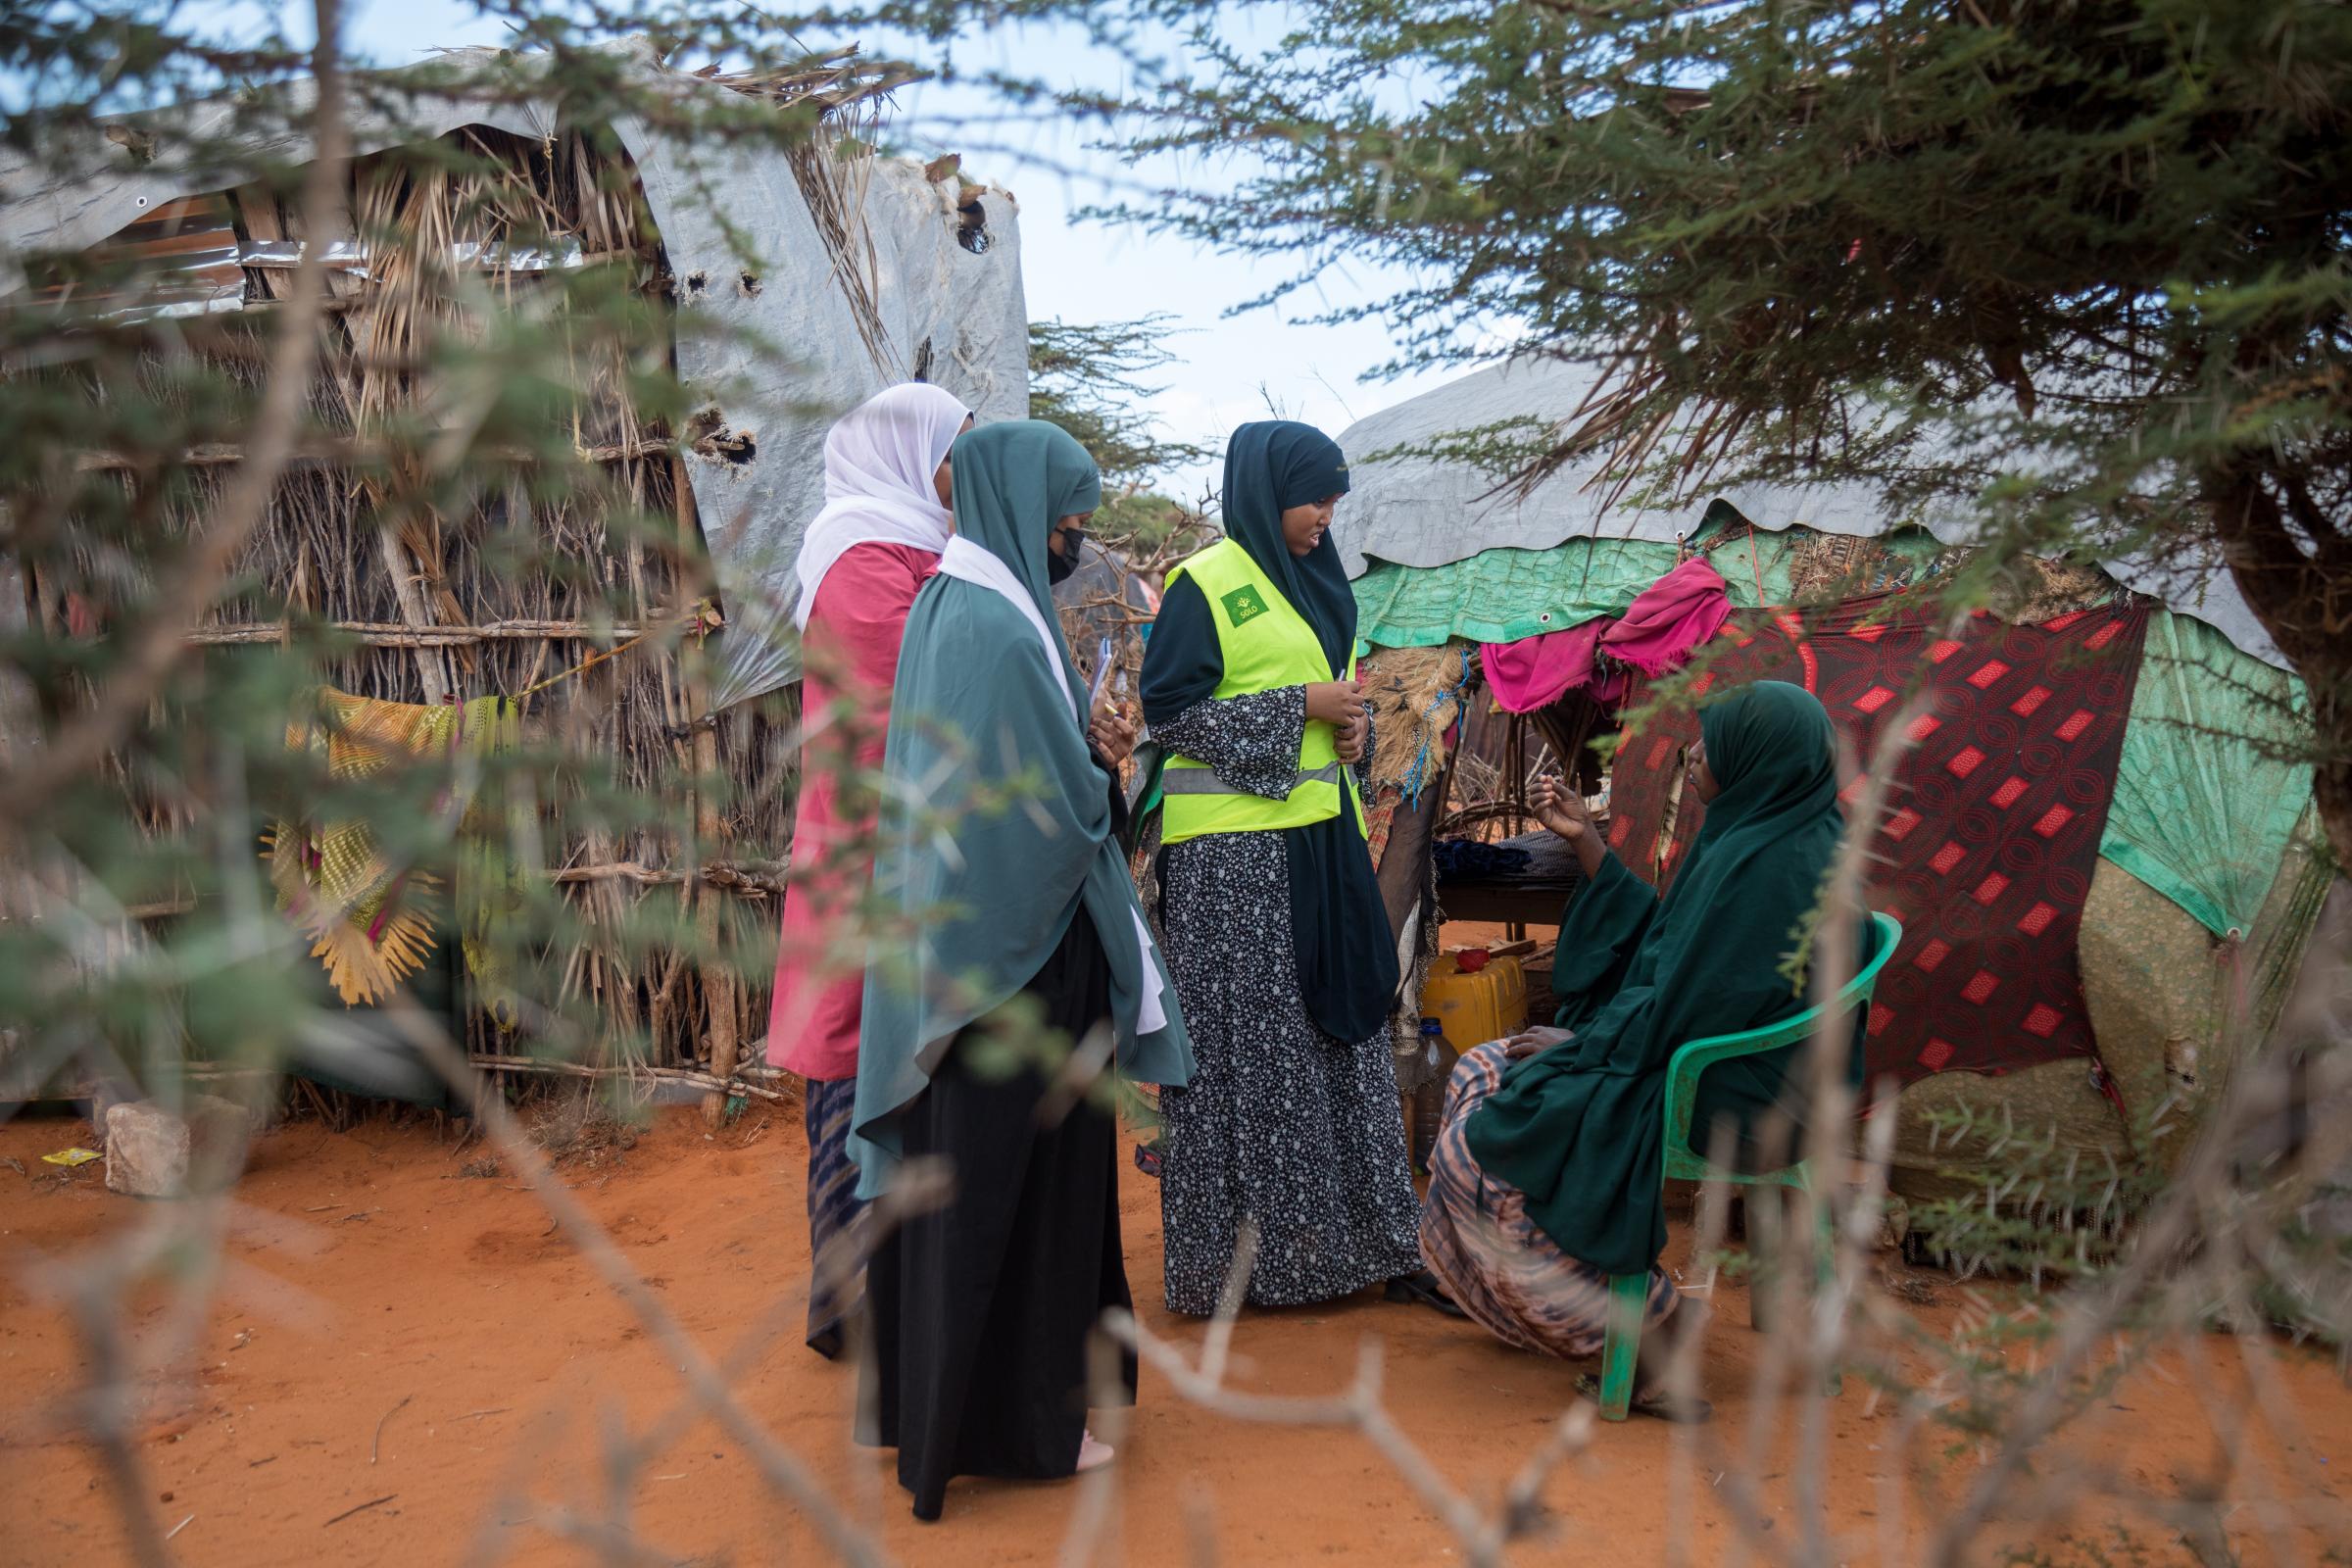 Overcoming Challenges through Healthcare Outreach in Kismayo - The UNFPA, in collaboration with implementing partner Somali Lifeline Organization (SOLO),...